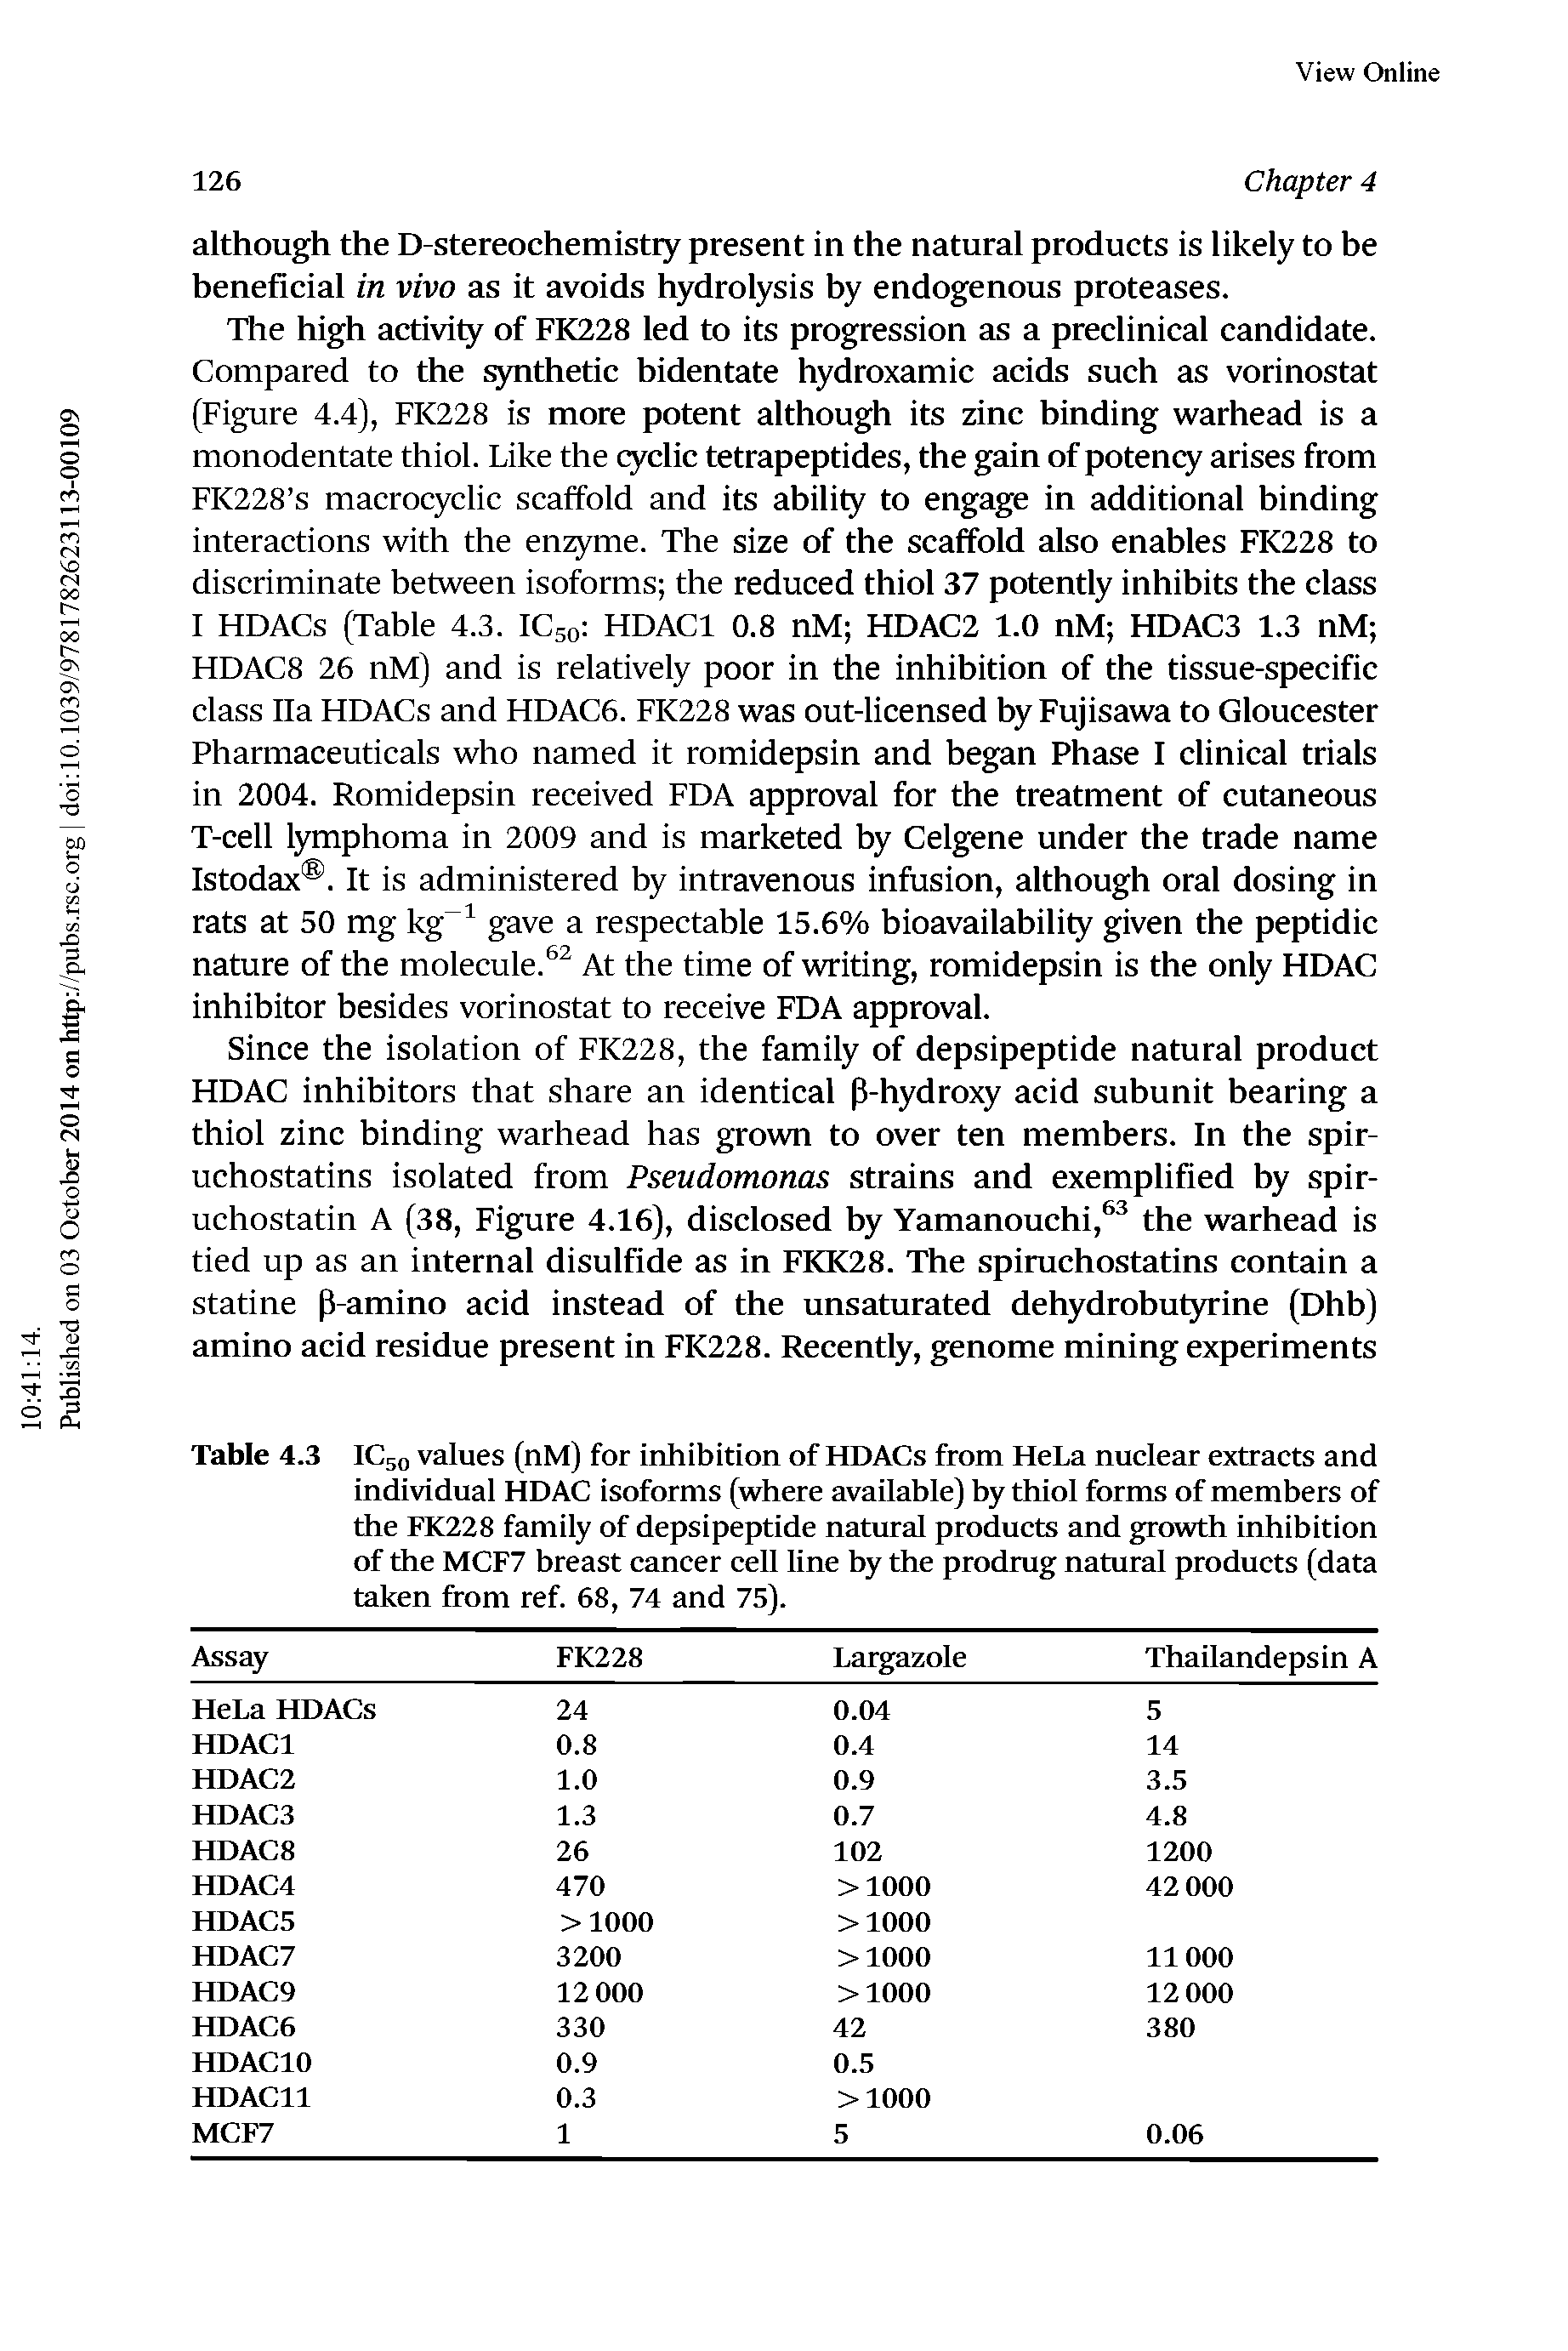 Table 4.3 IC50 values (nM) for inhibition of HDACs from HeLa nuclear extracts and individual HDAC isoforms (where available) by thiol forms of members of the FK228 family of depsipeptide natural products and growth inhibition of the MCF7 breast cancer cell line by the prodrug natural products (data taken from ref. 68, 74 and 75).